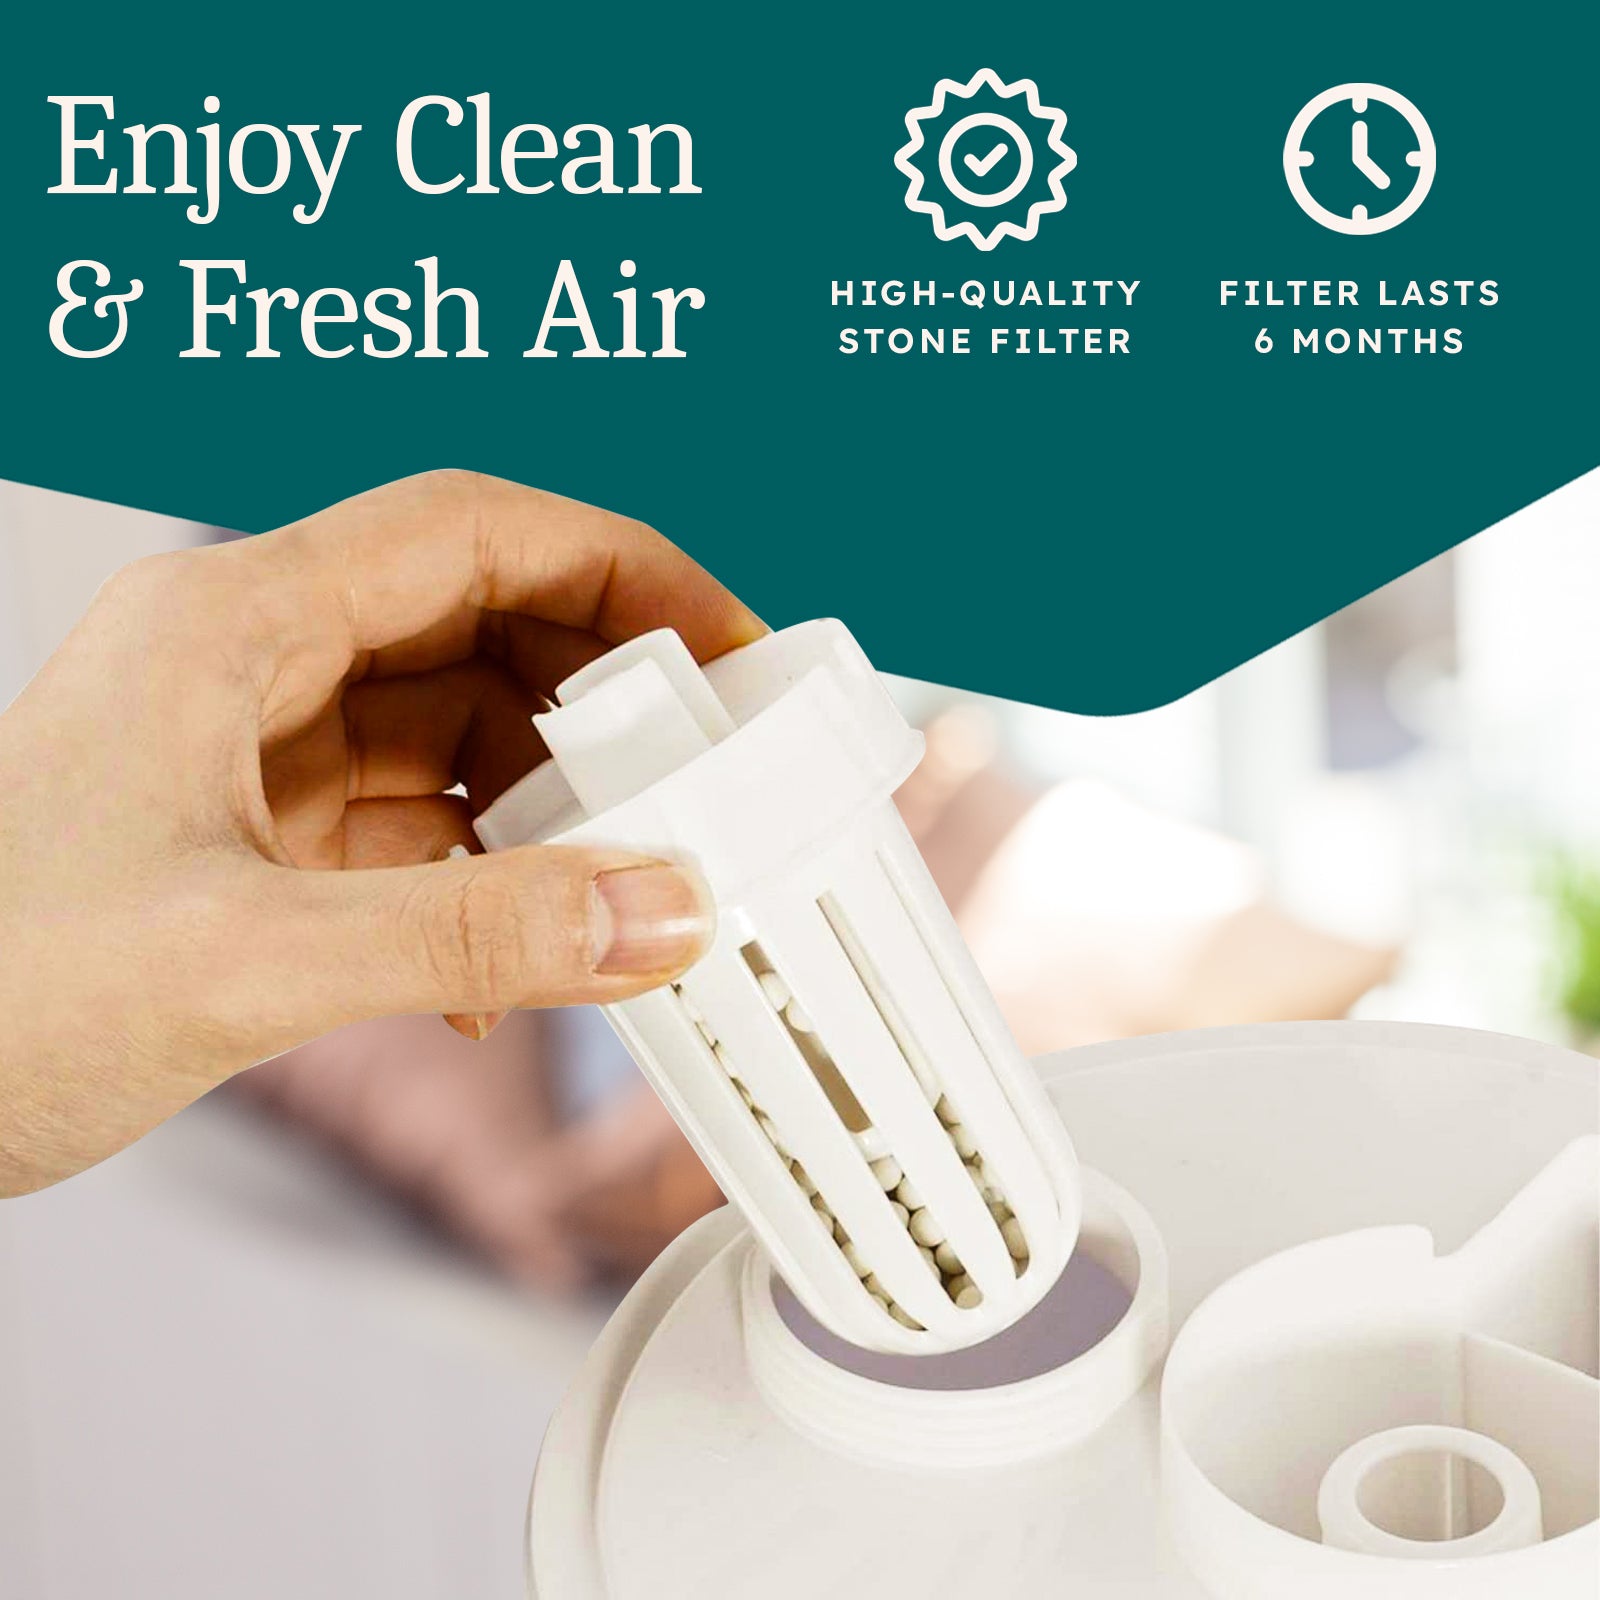 Replacement Filters For Cool Mist Ultrasonic Humidifier - Ceramic Water Filter Parts For Humidifiers - Works For Many Other Brands As Well (3-Pack)